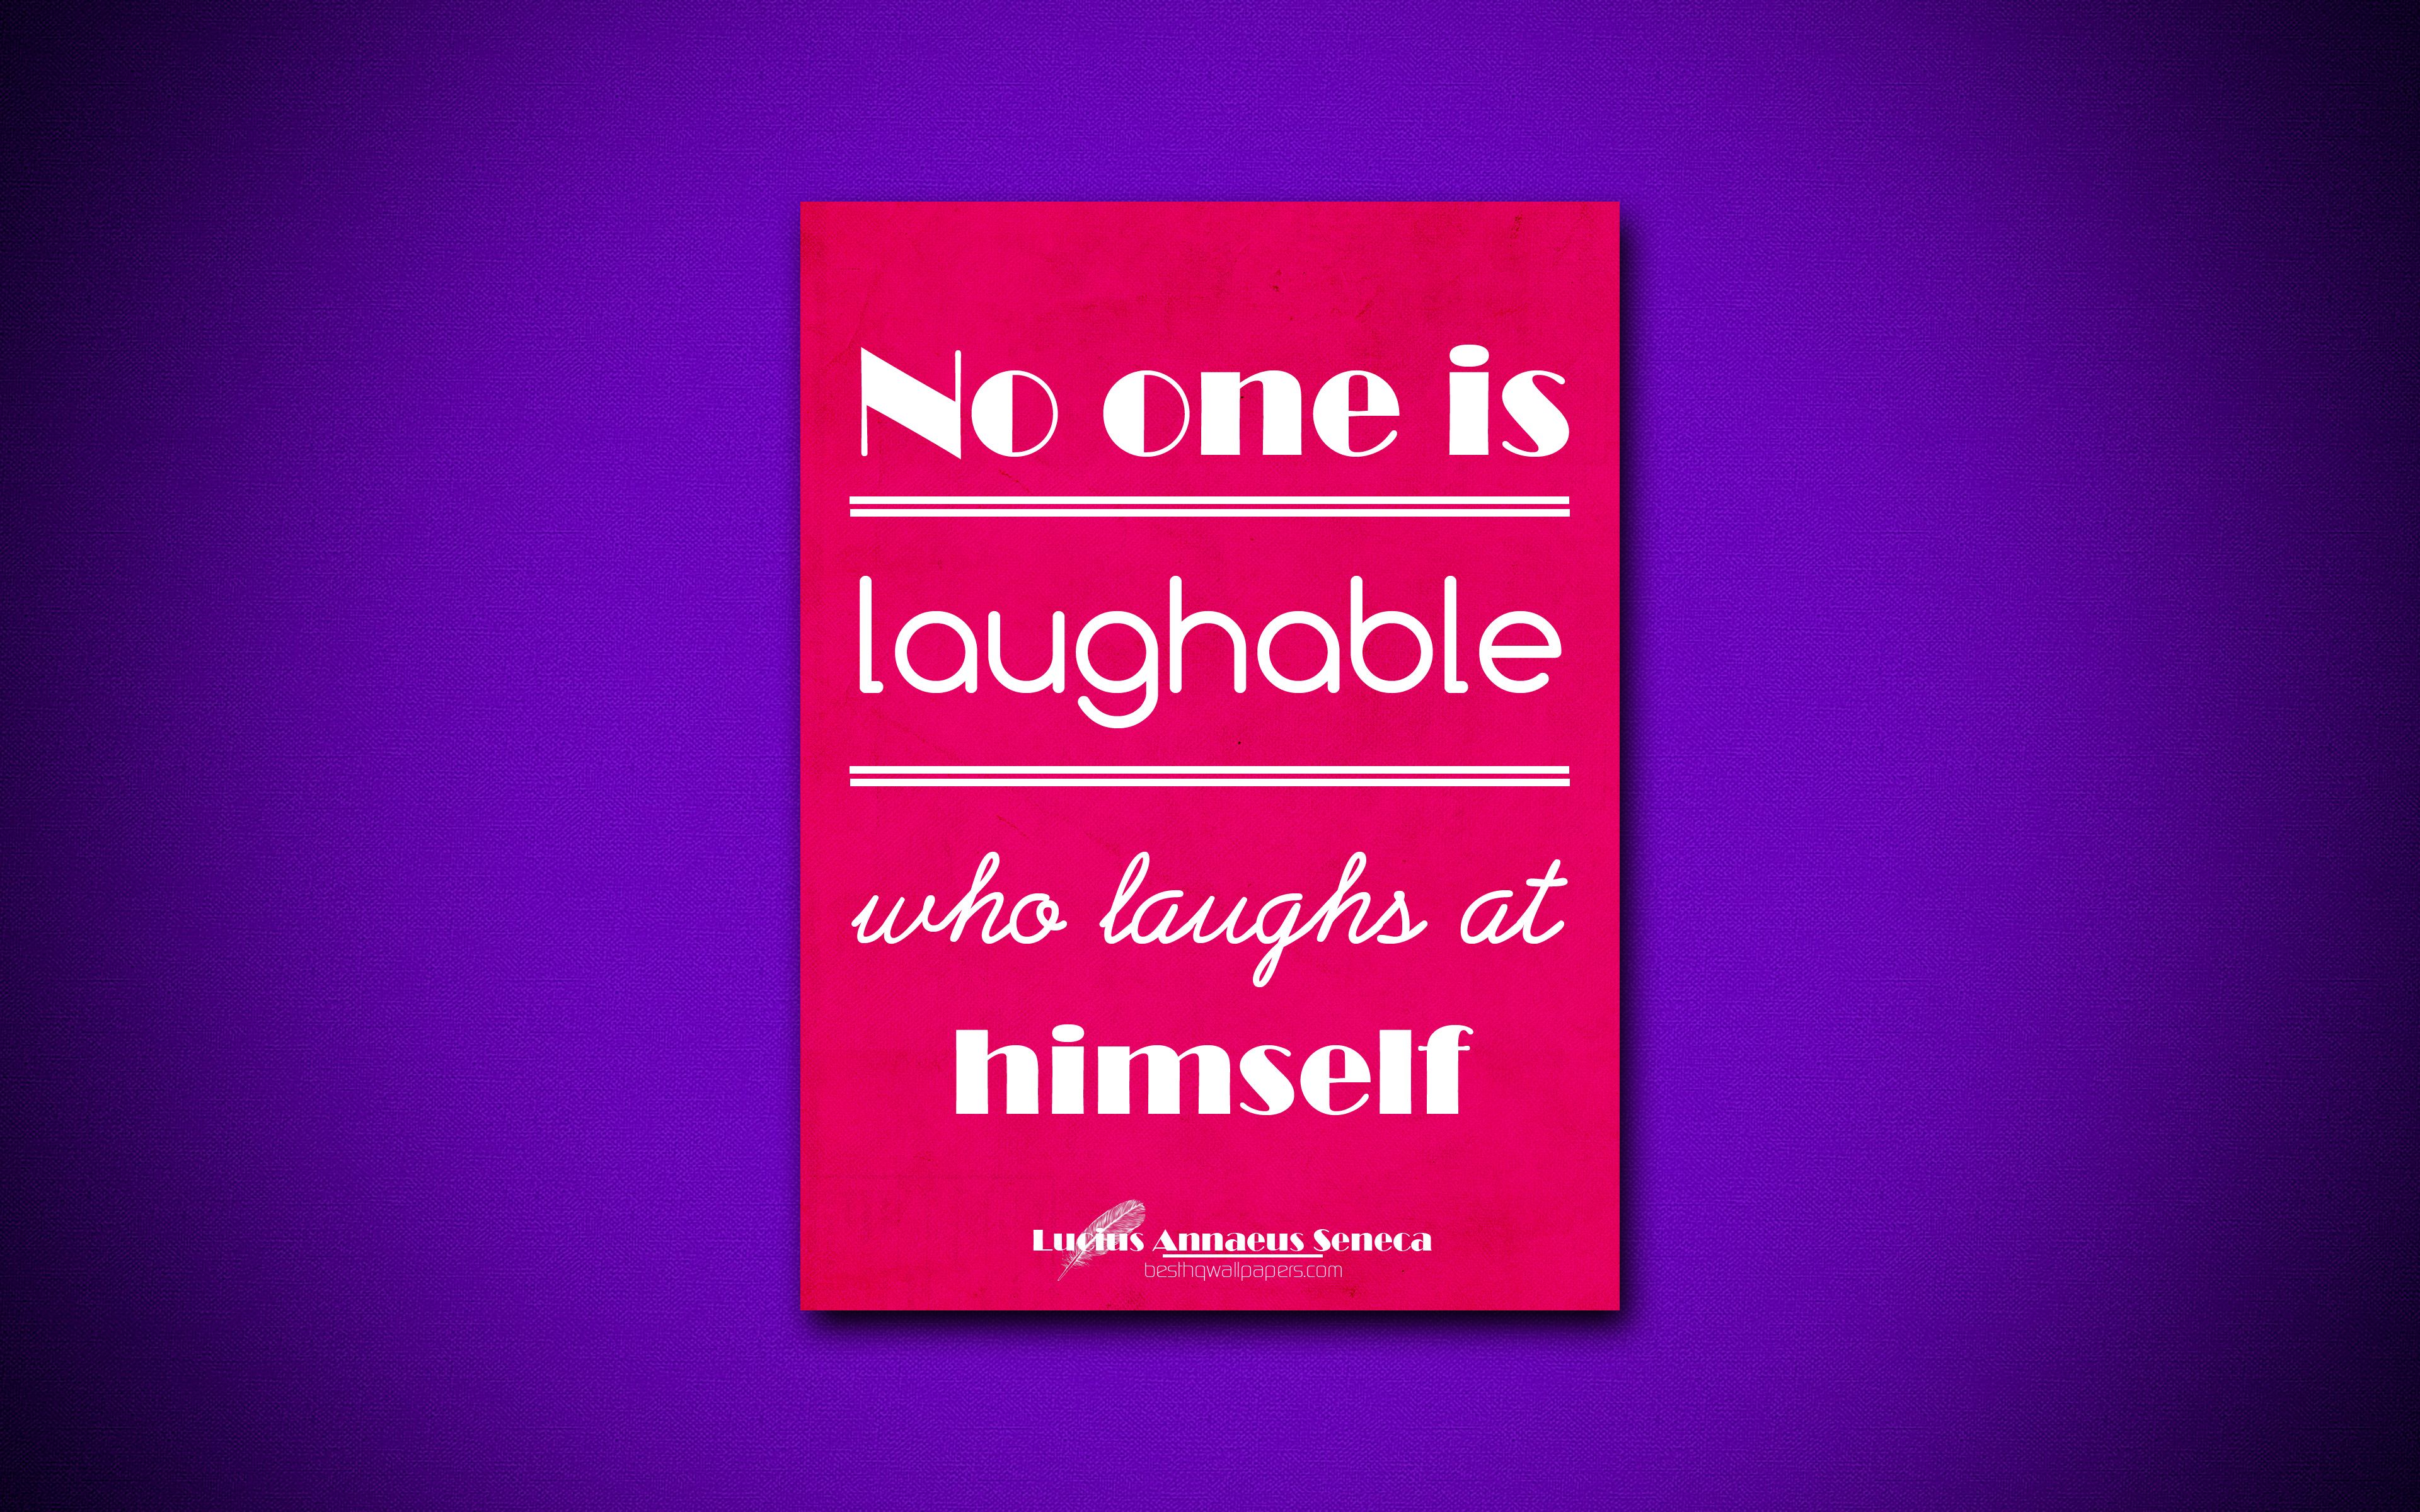 Download wallpaper 4k, No one is laughable who laughs at himself, quotes about life, Lucius Annaeus Seneca, purple paper, popular quotes, inspiration, Lucius Annaeus Seneca quotes for desktop with resolution 3840x2400. High